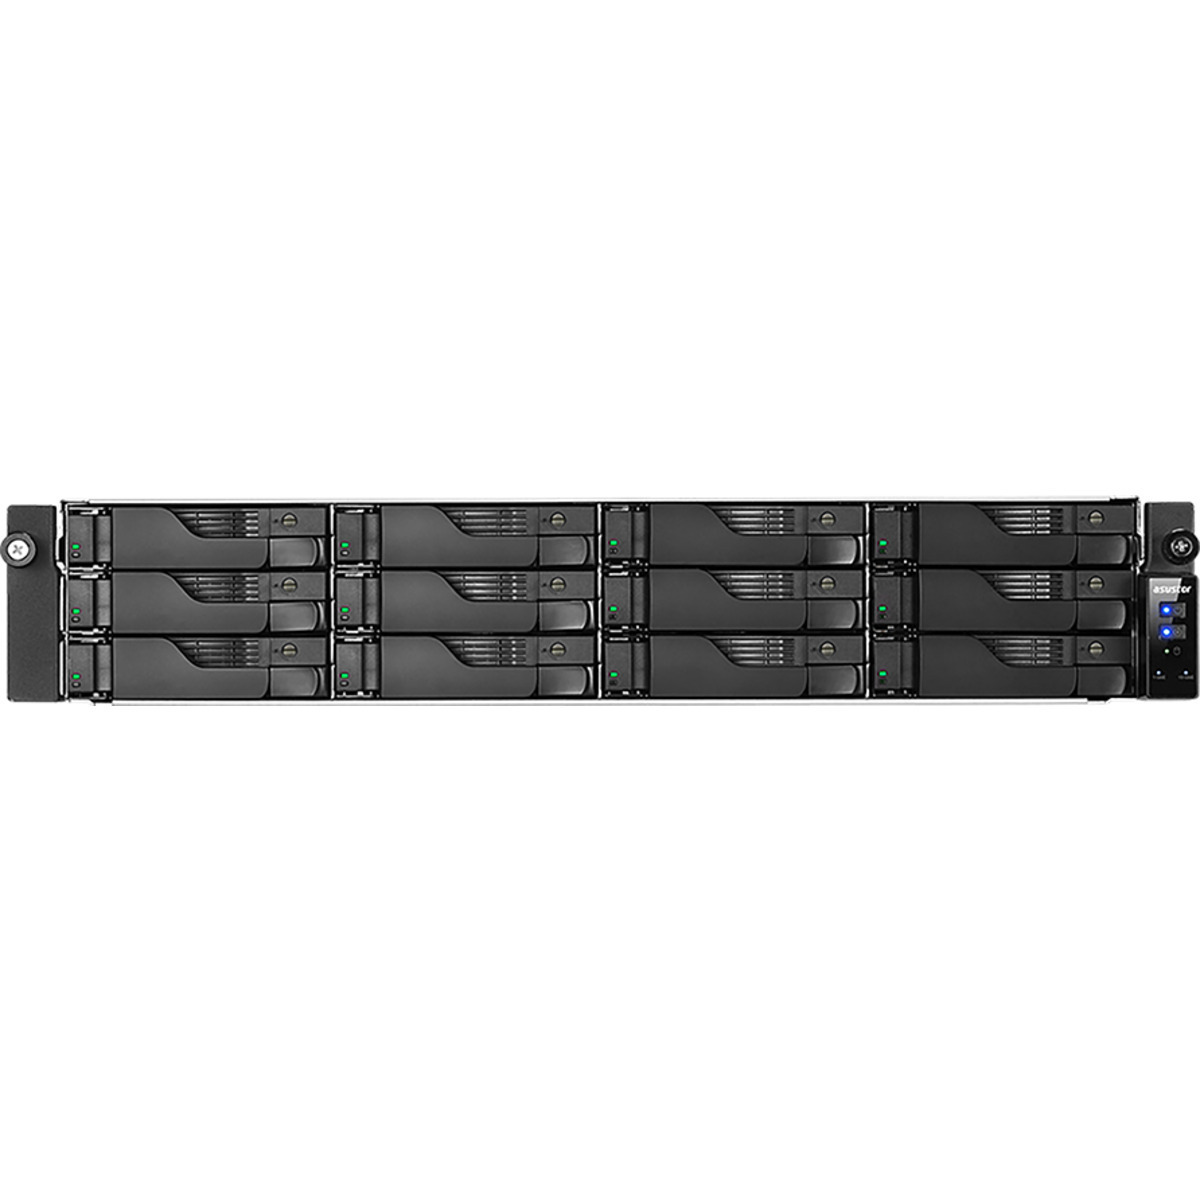 ASUSTOR LOCKERSTOR 12RD AS6512RD 160tb 12-Bay RackMount Multimedia / Power User / Business NAS - Network Attached Storage Device 10x16tb Toshiba Enterprise Capacity MG08ACA16TE 3.5 7200rpm SATA 6Gb/s HDD ENTERPRISE Class Drives Installed - Burn-In Tested - FREE RAM UPGRADE LOCKERSTOR 12RD AS6512RD